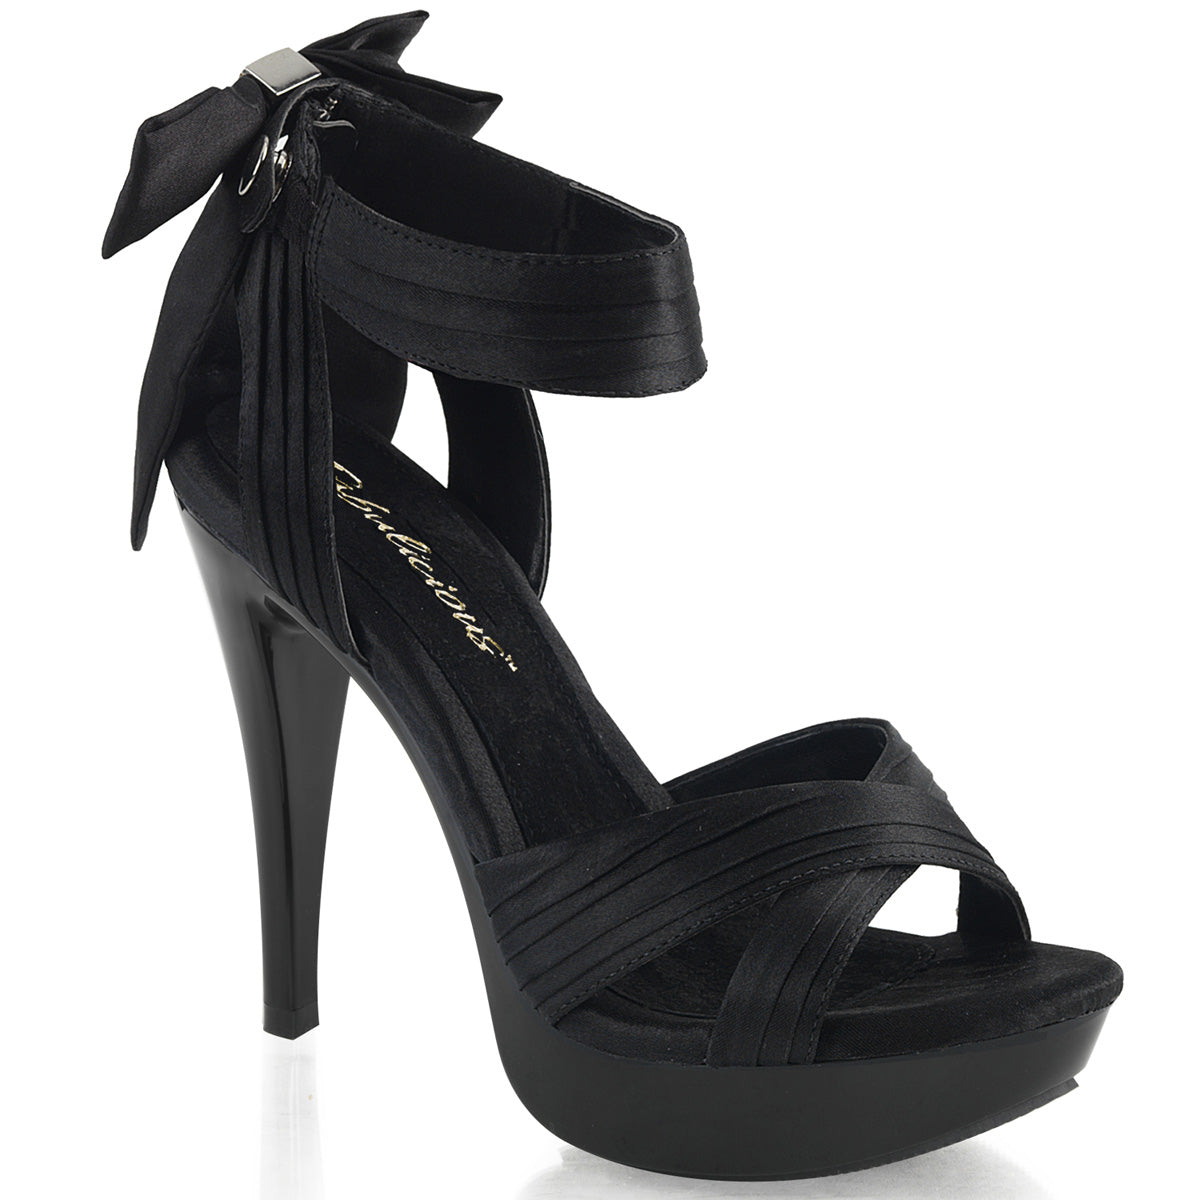 COCKTAIL-568 Fabulicious 5 Inch Heel Black Satin Sexy Shoes